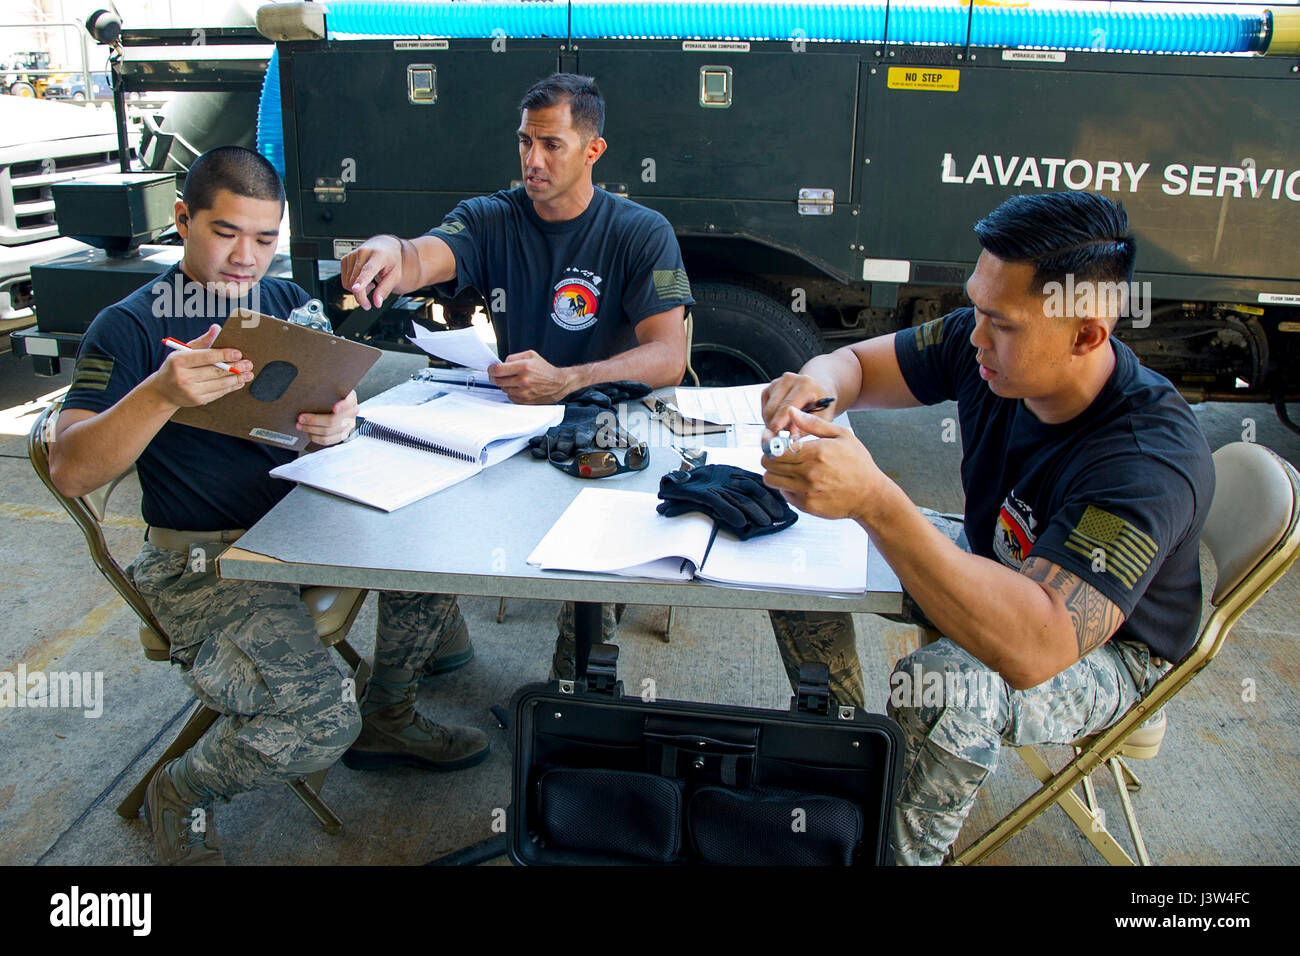 (L-R) Reserve Citizen Airmen Tech. Sgt. Marlon Gibo, Master Sgt. Alfred Van Gieson and Tech. Sgt. Dennis Dedicatoria inventory and inspect forms during the Port Dawg Challenge at Dobbins Air Reserve Base, Ga., April 25, 2017. The 48th Aerial Port Squadron was one of 23 teams competing in the 4th biennial Air Force Reserve Command's Port Dawg Challenge, which was designed to test and maintain the camaraderie of aerial port Airmen while promoting professionalism, leadership, training and communication between 'Port Dawgs.' The 48th APS, located on Joint Base Pearl Harbor-Hickam, Hawaii, is a com Stock Photo